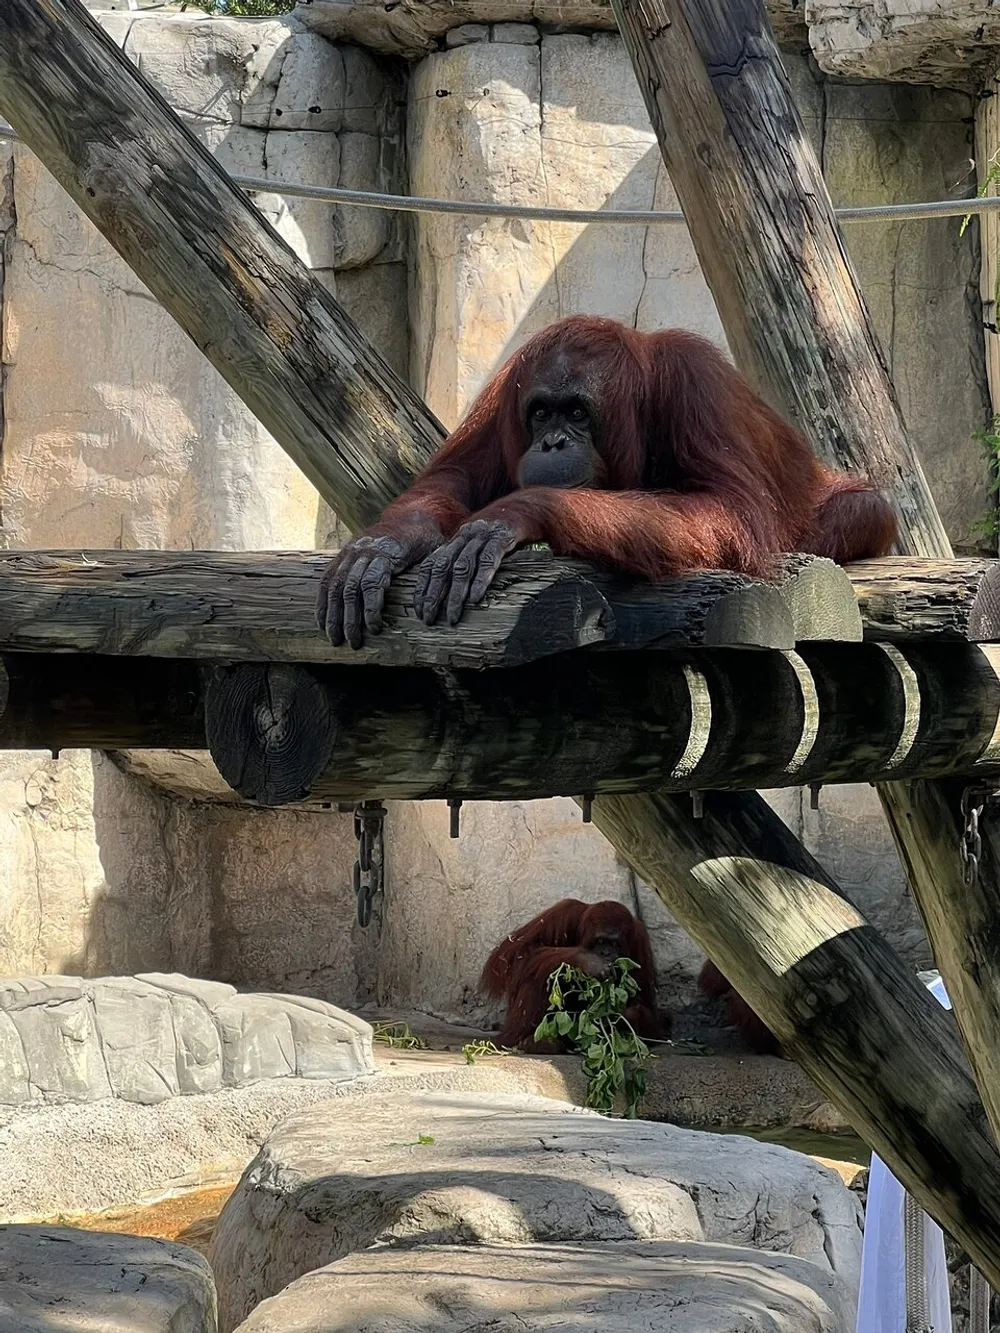 An orangutan is resting its head on its hands while lounging on a wooden platform in a zoo enclosure with another orangutan visible in the background